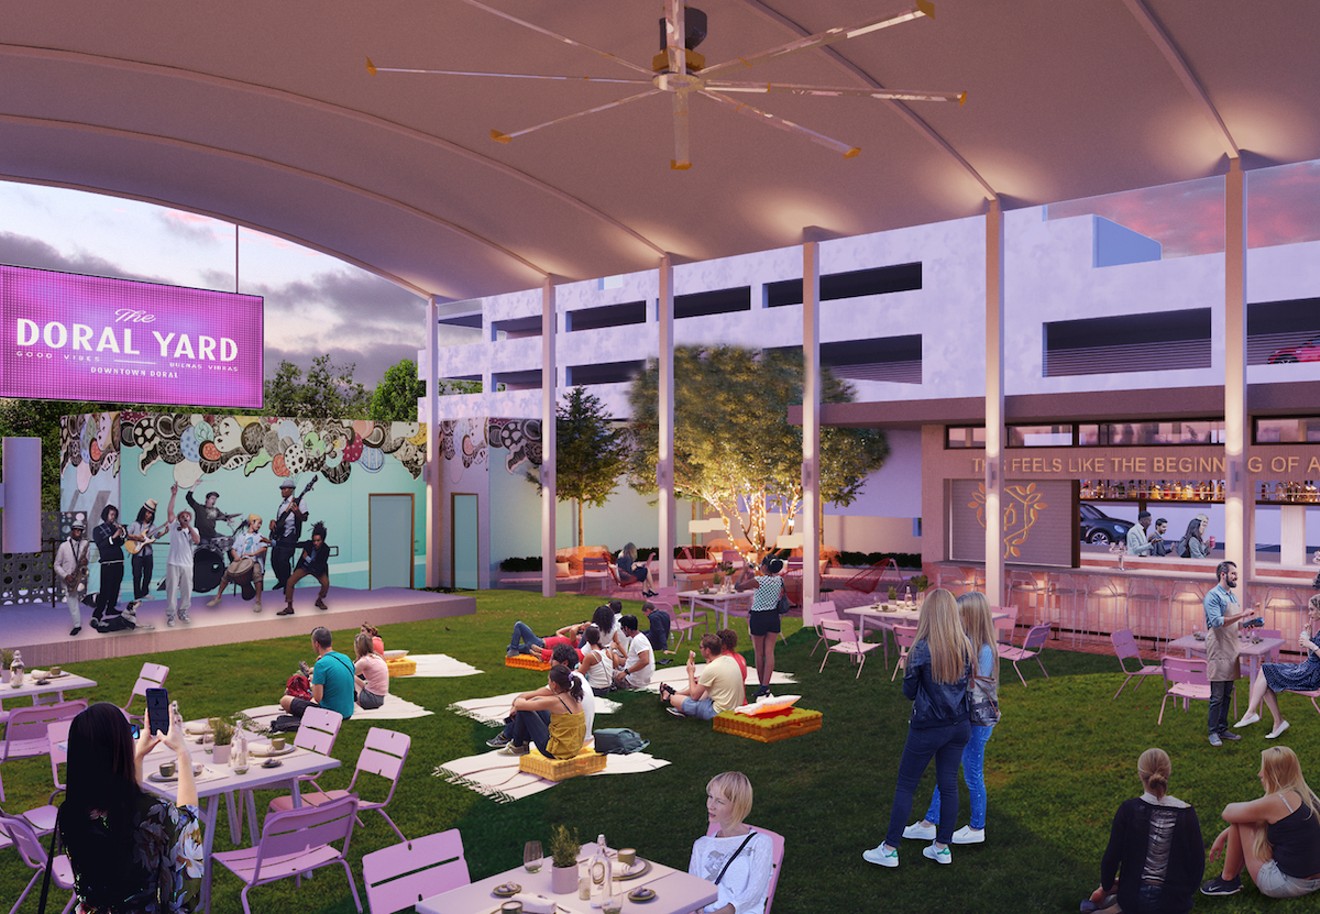 The Doral Yard will soon unveil "The Backyard," an outdoor expansion.